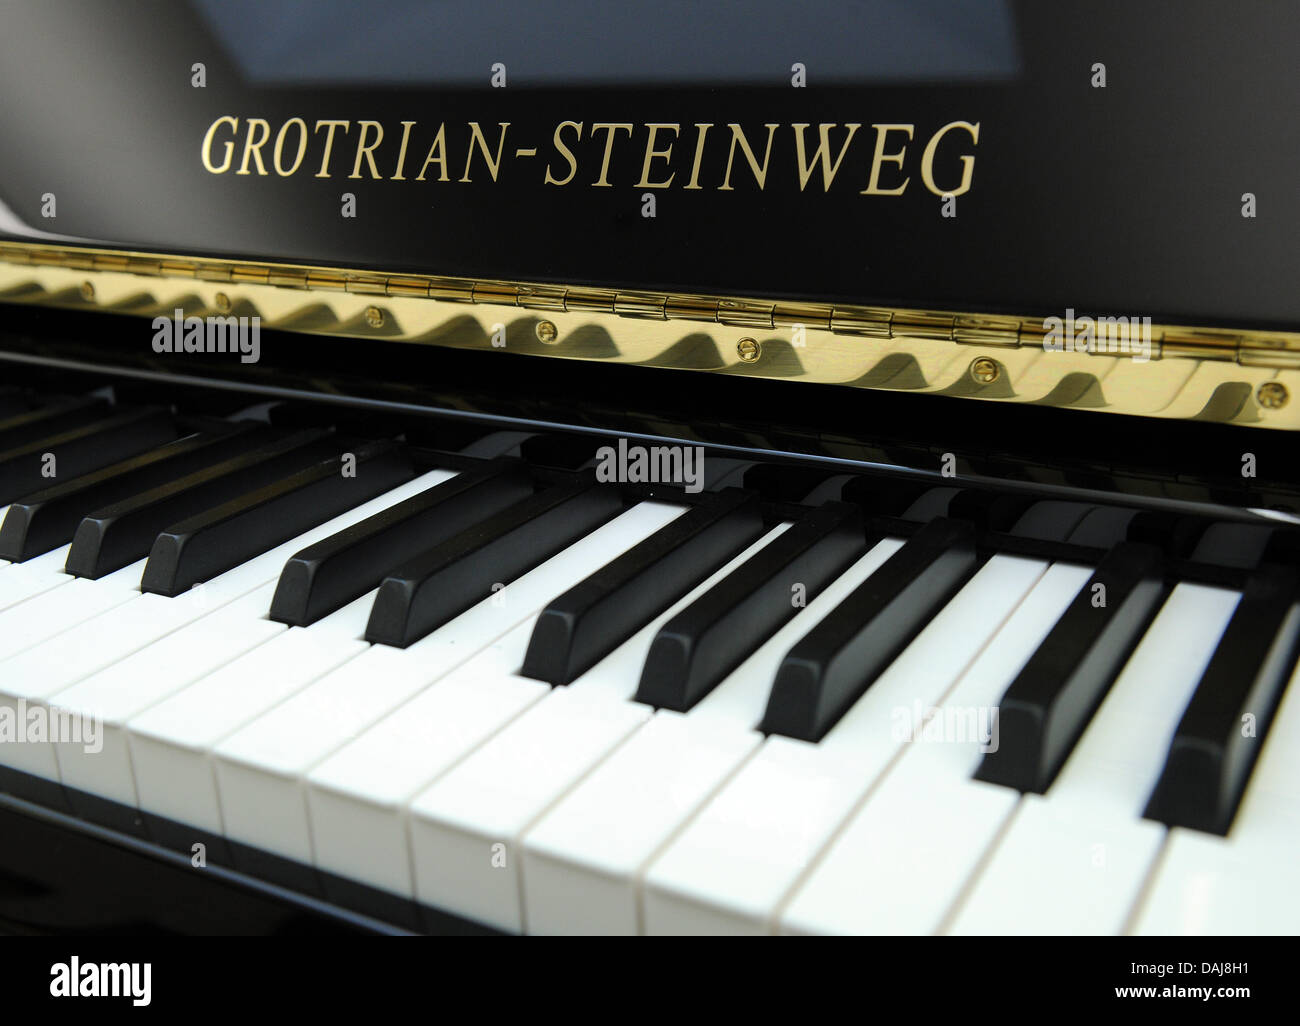 Grotrian steinweg hi-res stock photography and images - Alamy